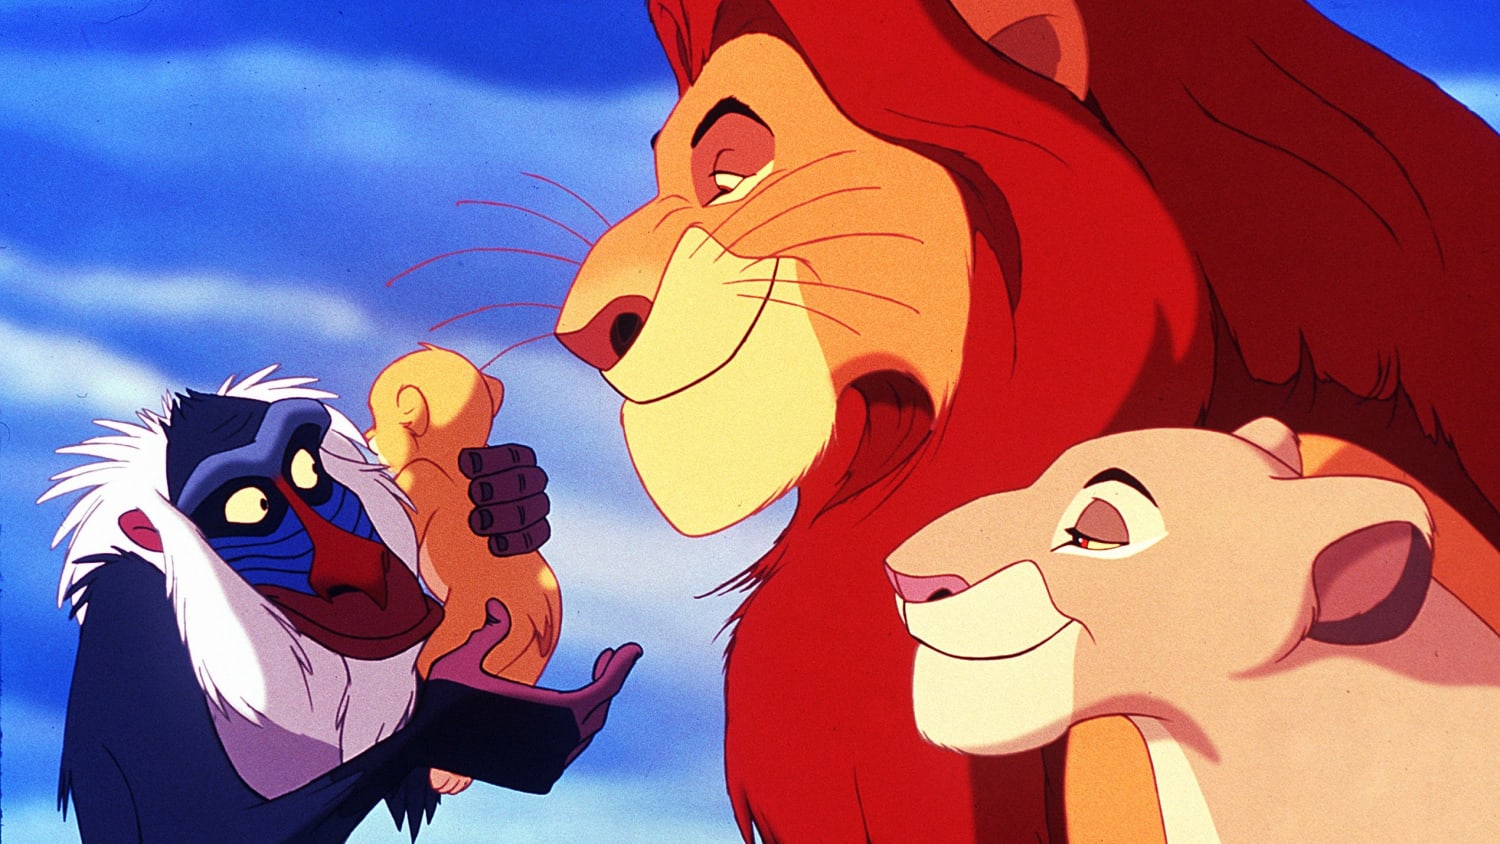 Ranked: The 25 best classic Disney songs, from 'Mary Poppins' to 'The Lion King'